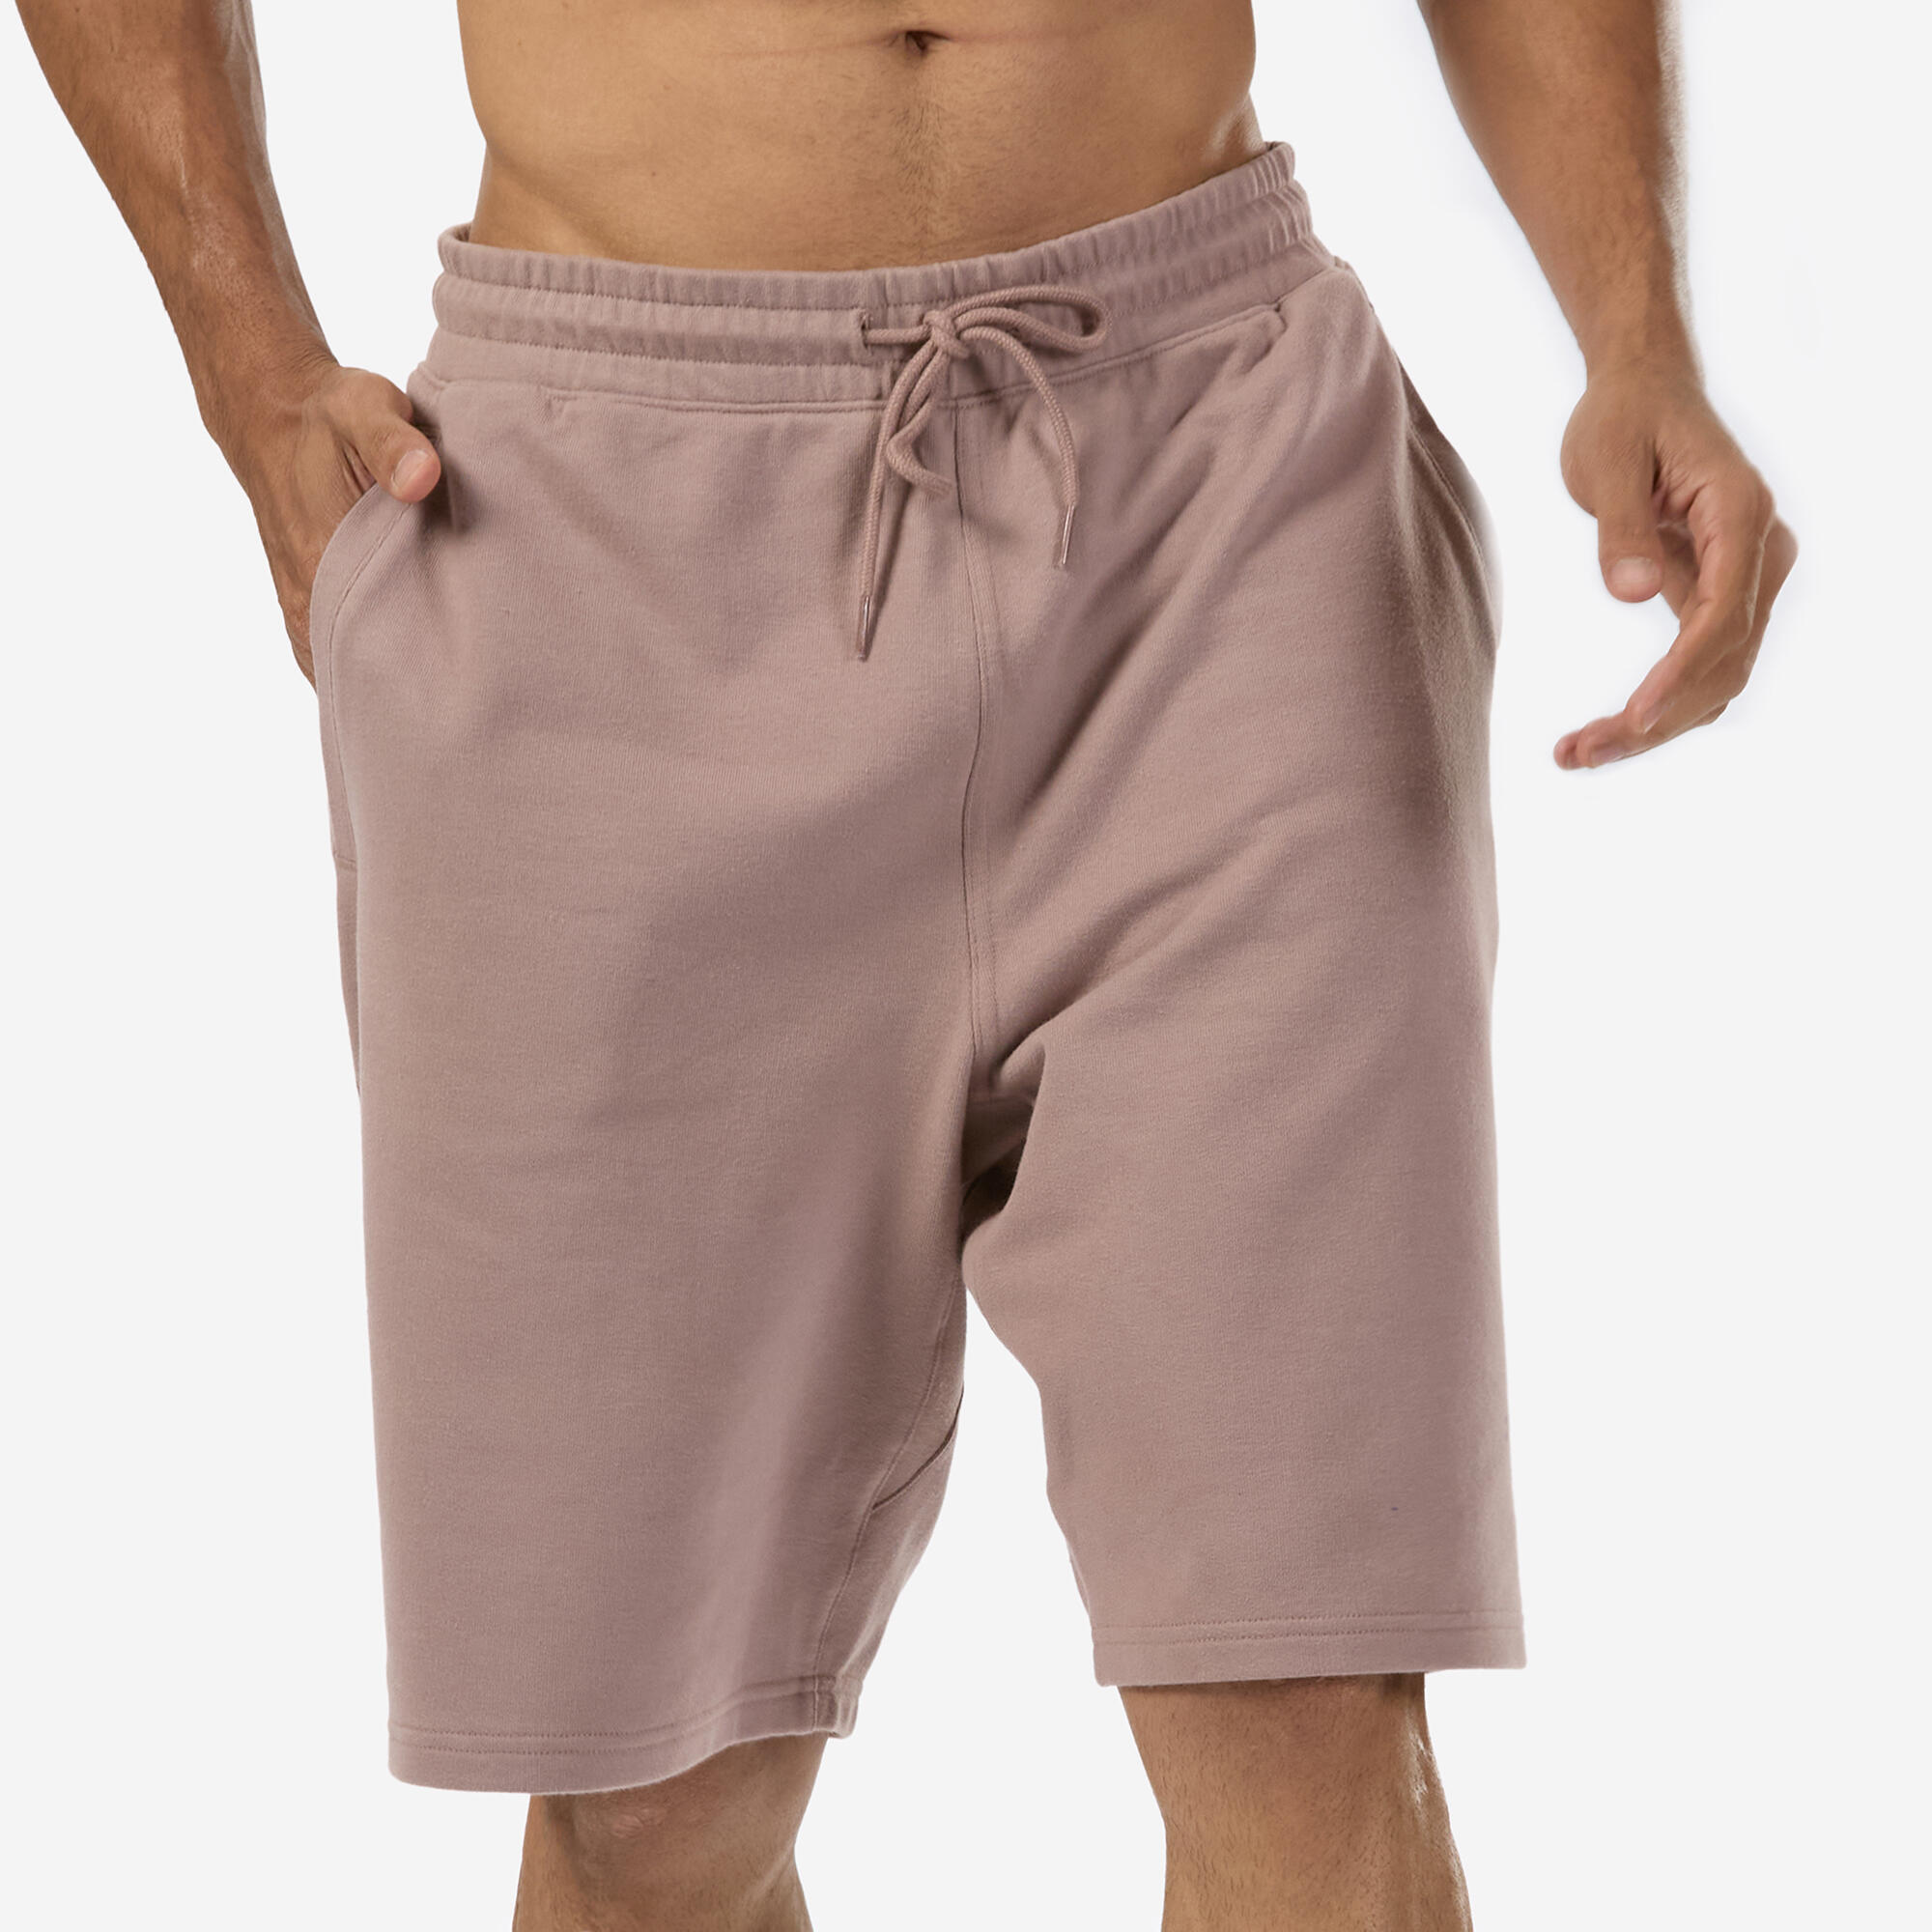 Men's Fitness Shorts - Frost Brown 1/7